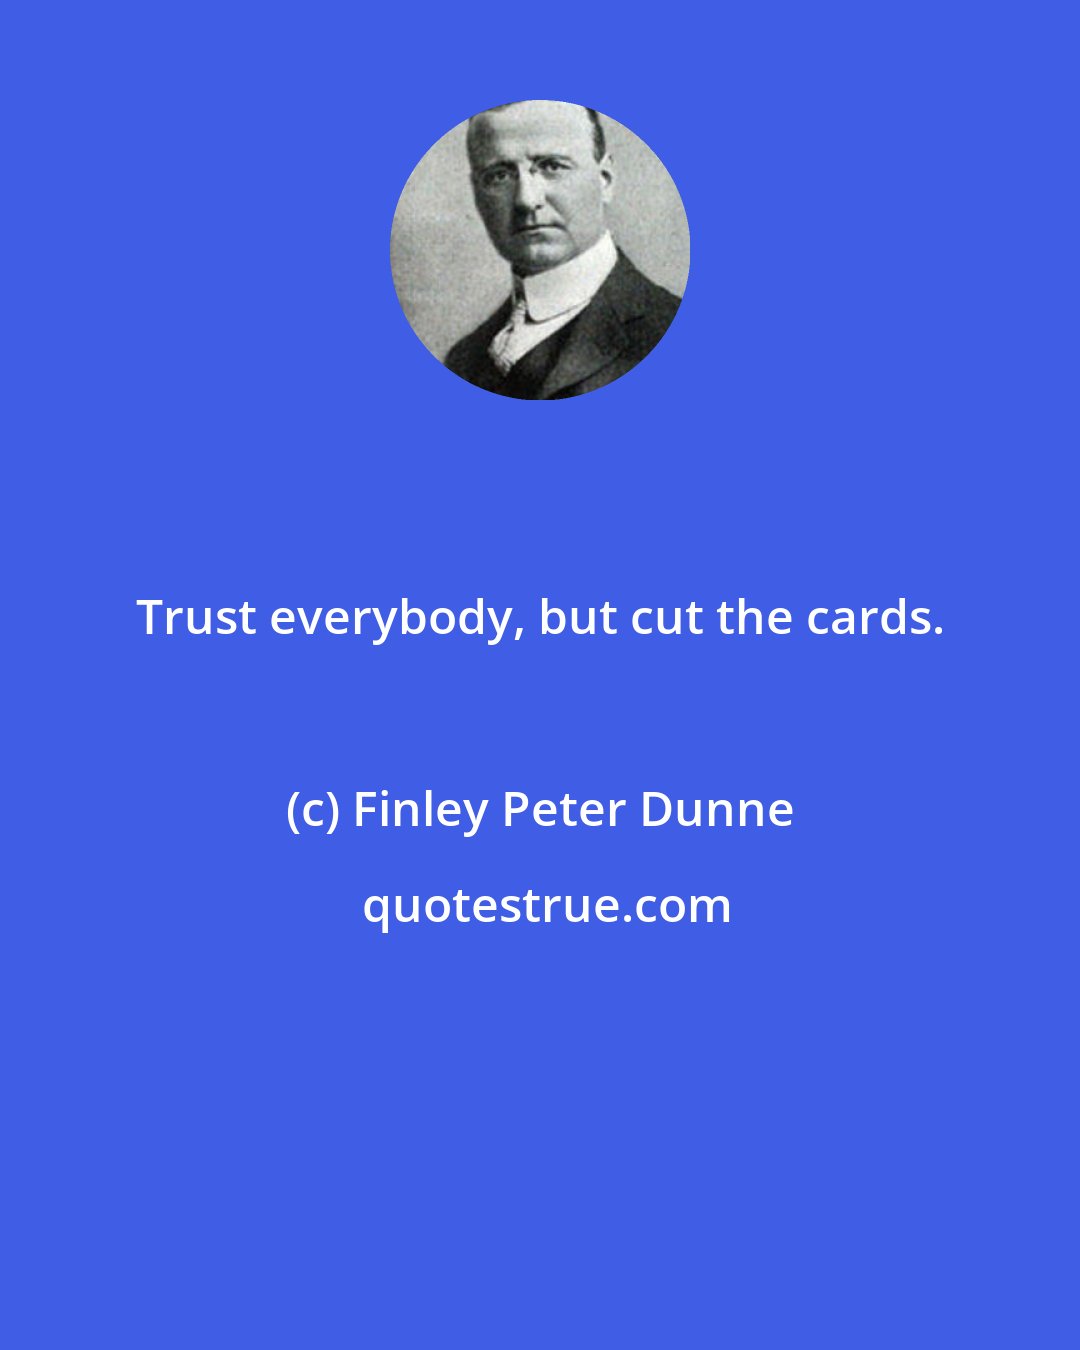 Finley Peter Dunne: Trust everybody, but cut the cards.